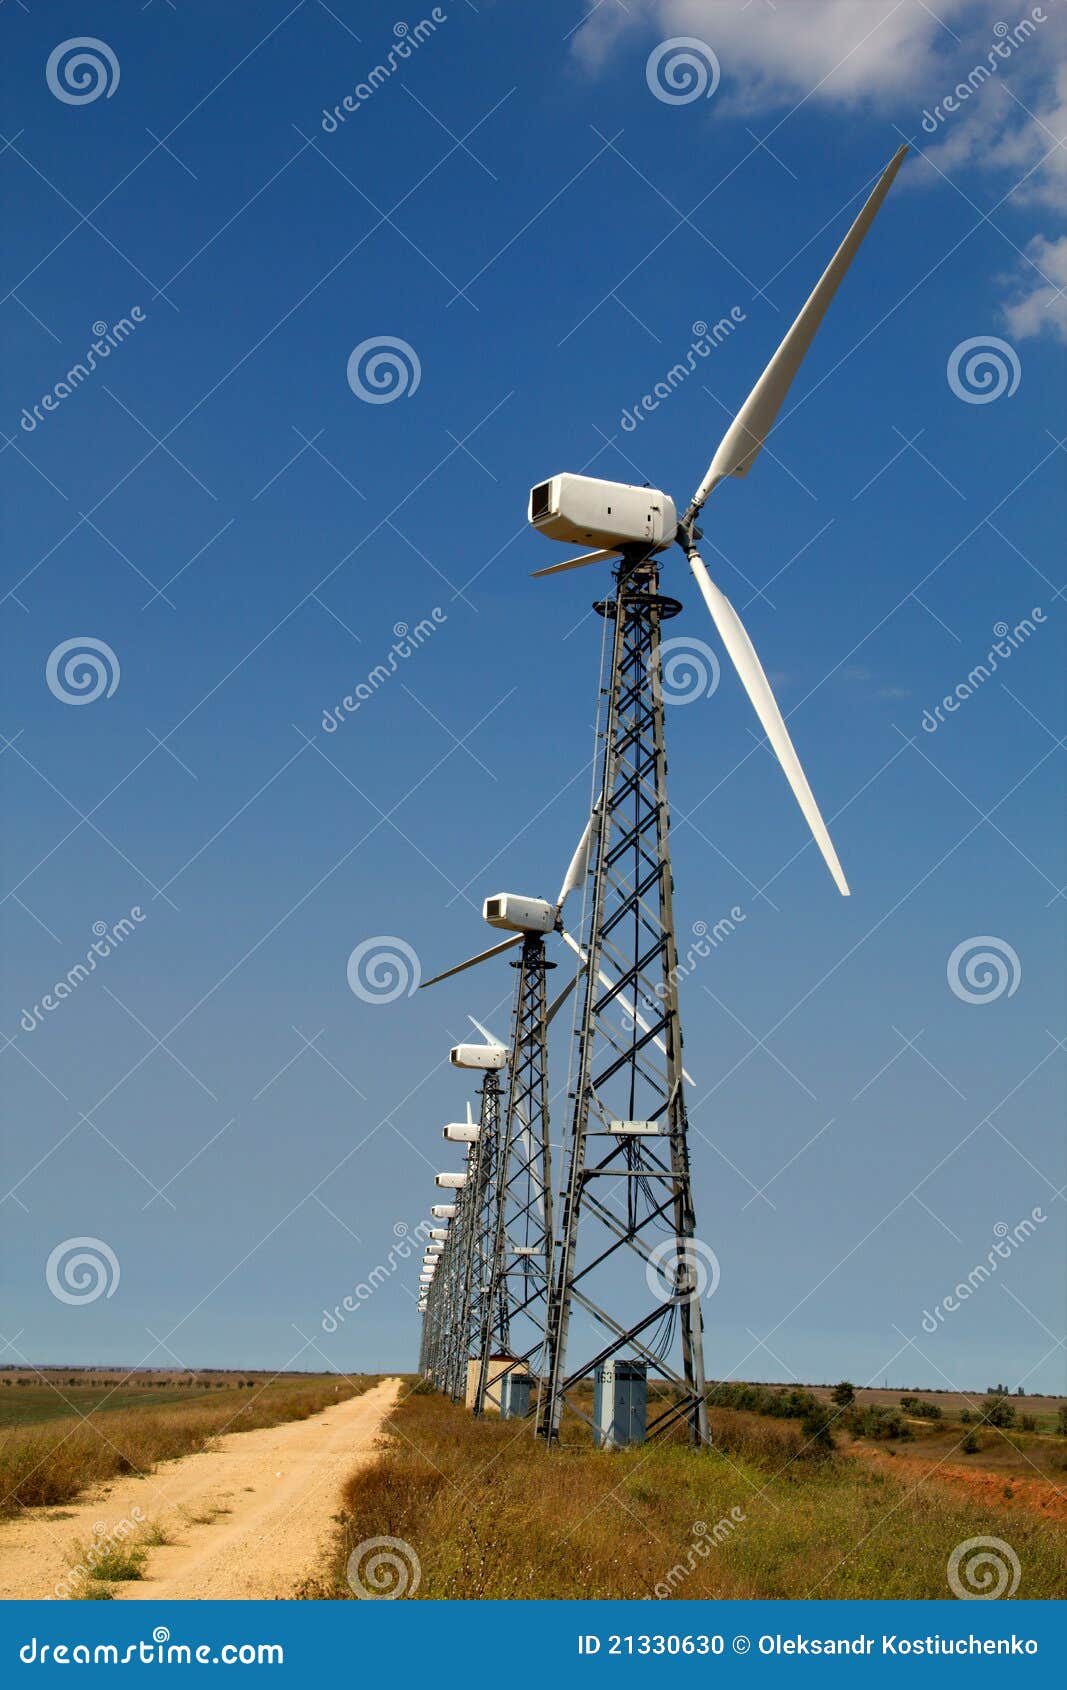 the wind generator against the blue sky